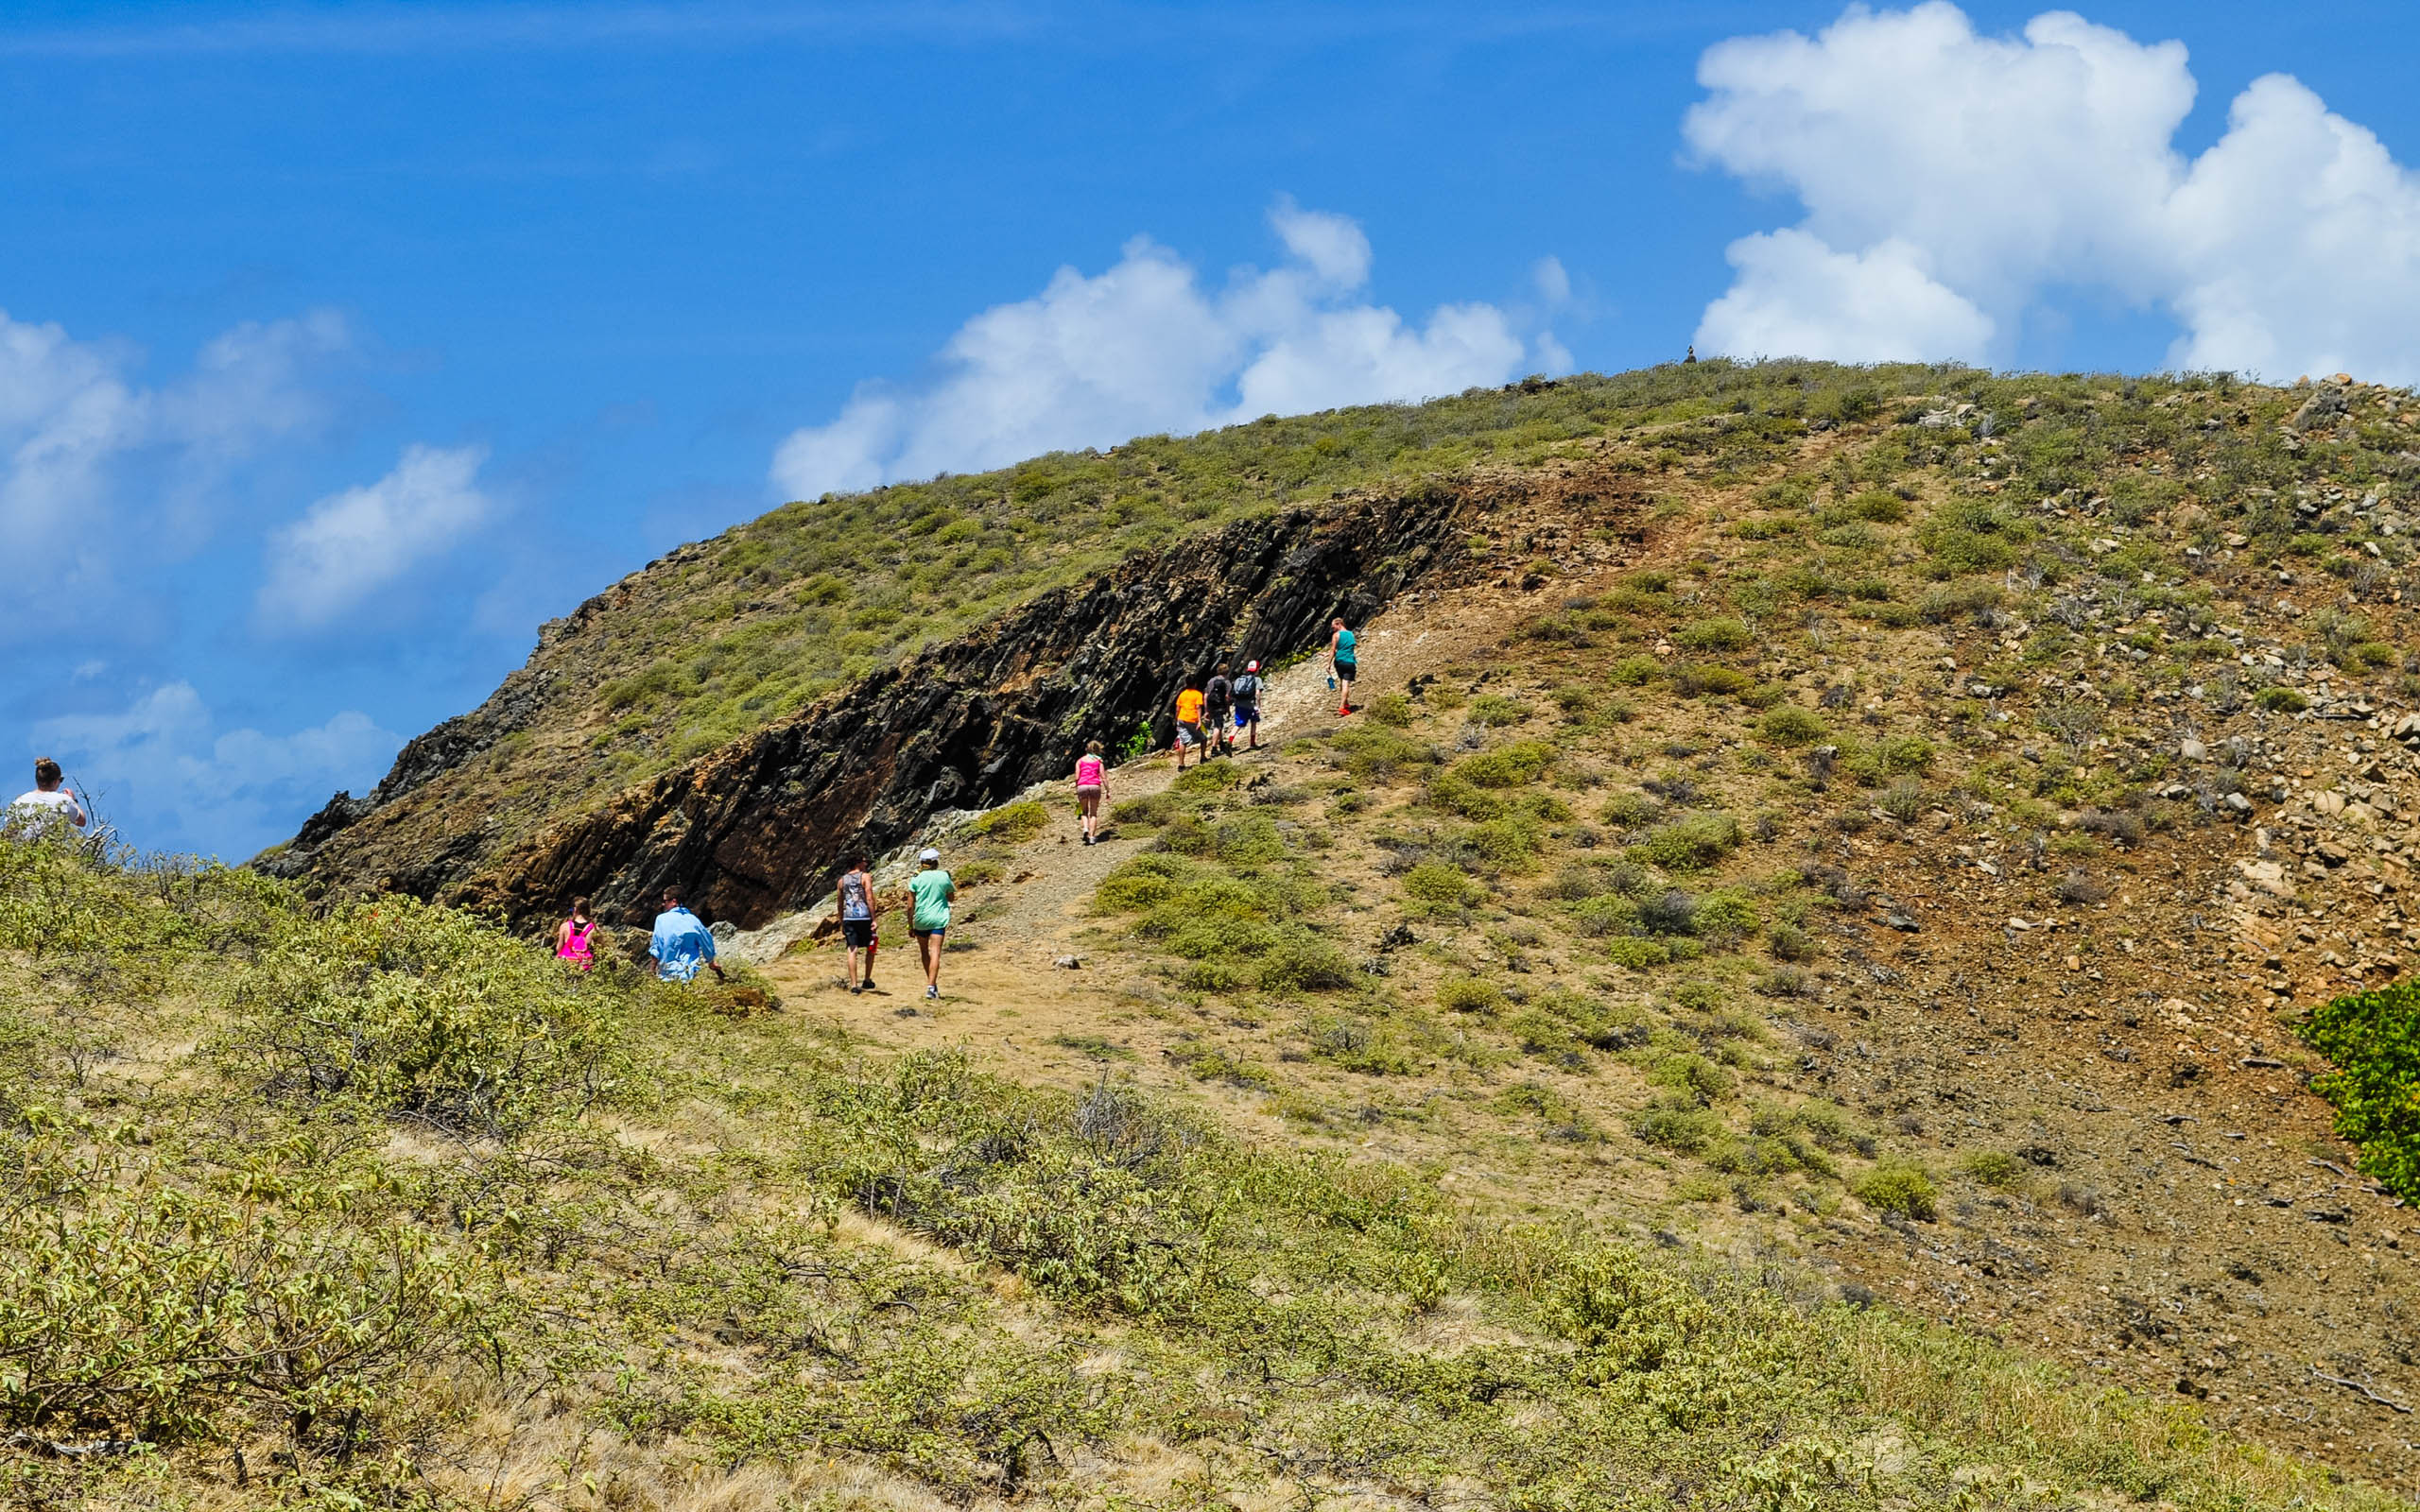 A group of people hiking up a hill.